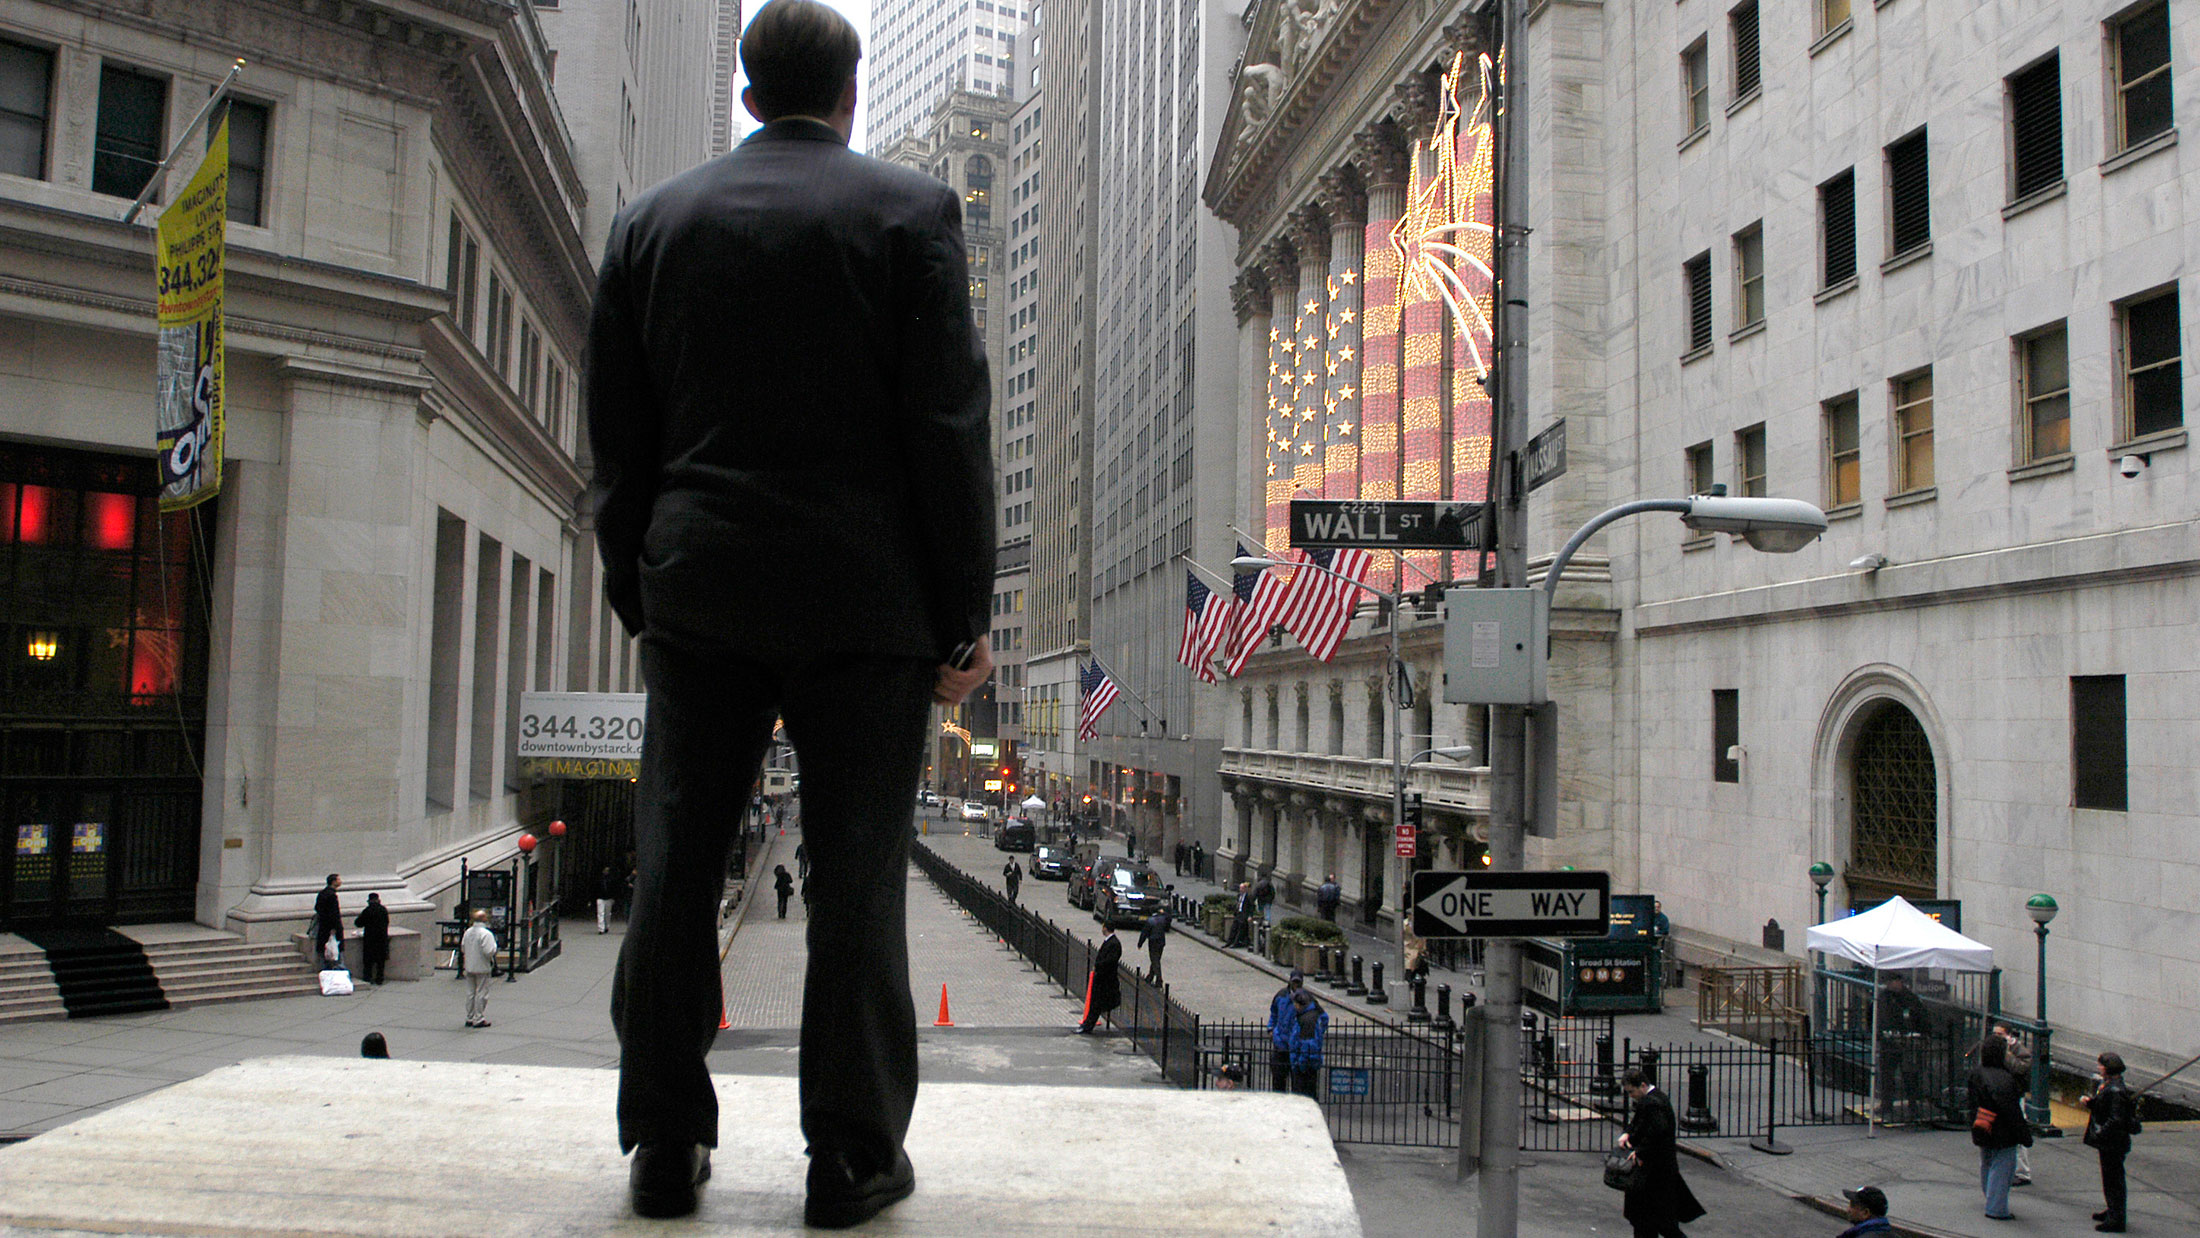 It's getting lonelier at Wall Street banks.
